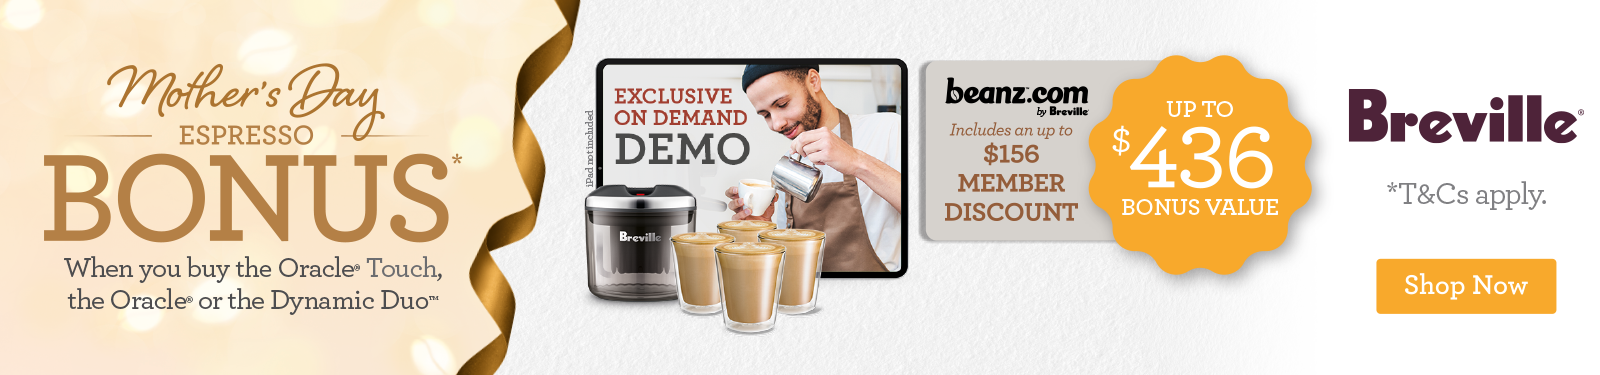 Bonus Barista Pack On Selected Breville Coffee Machines